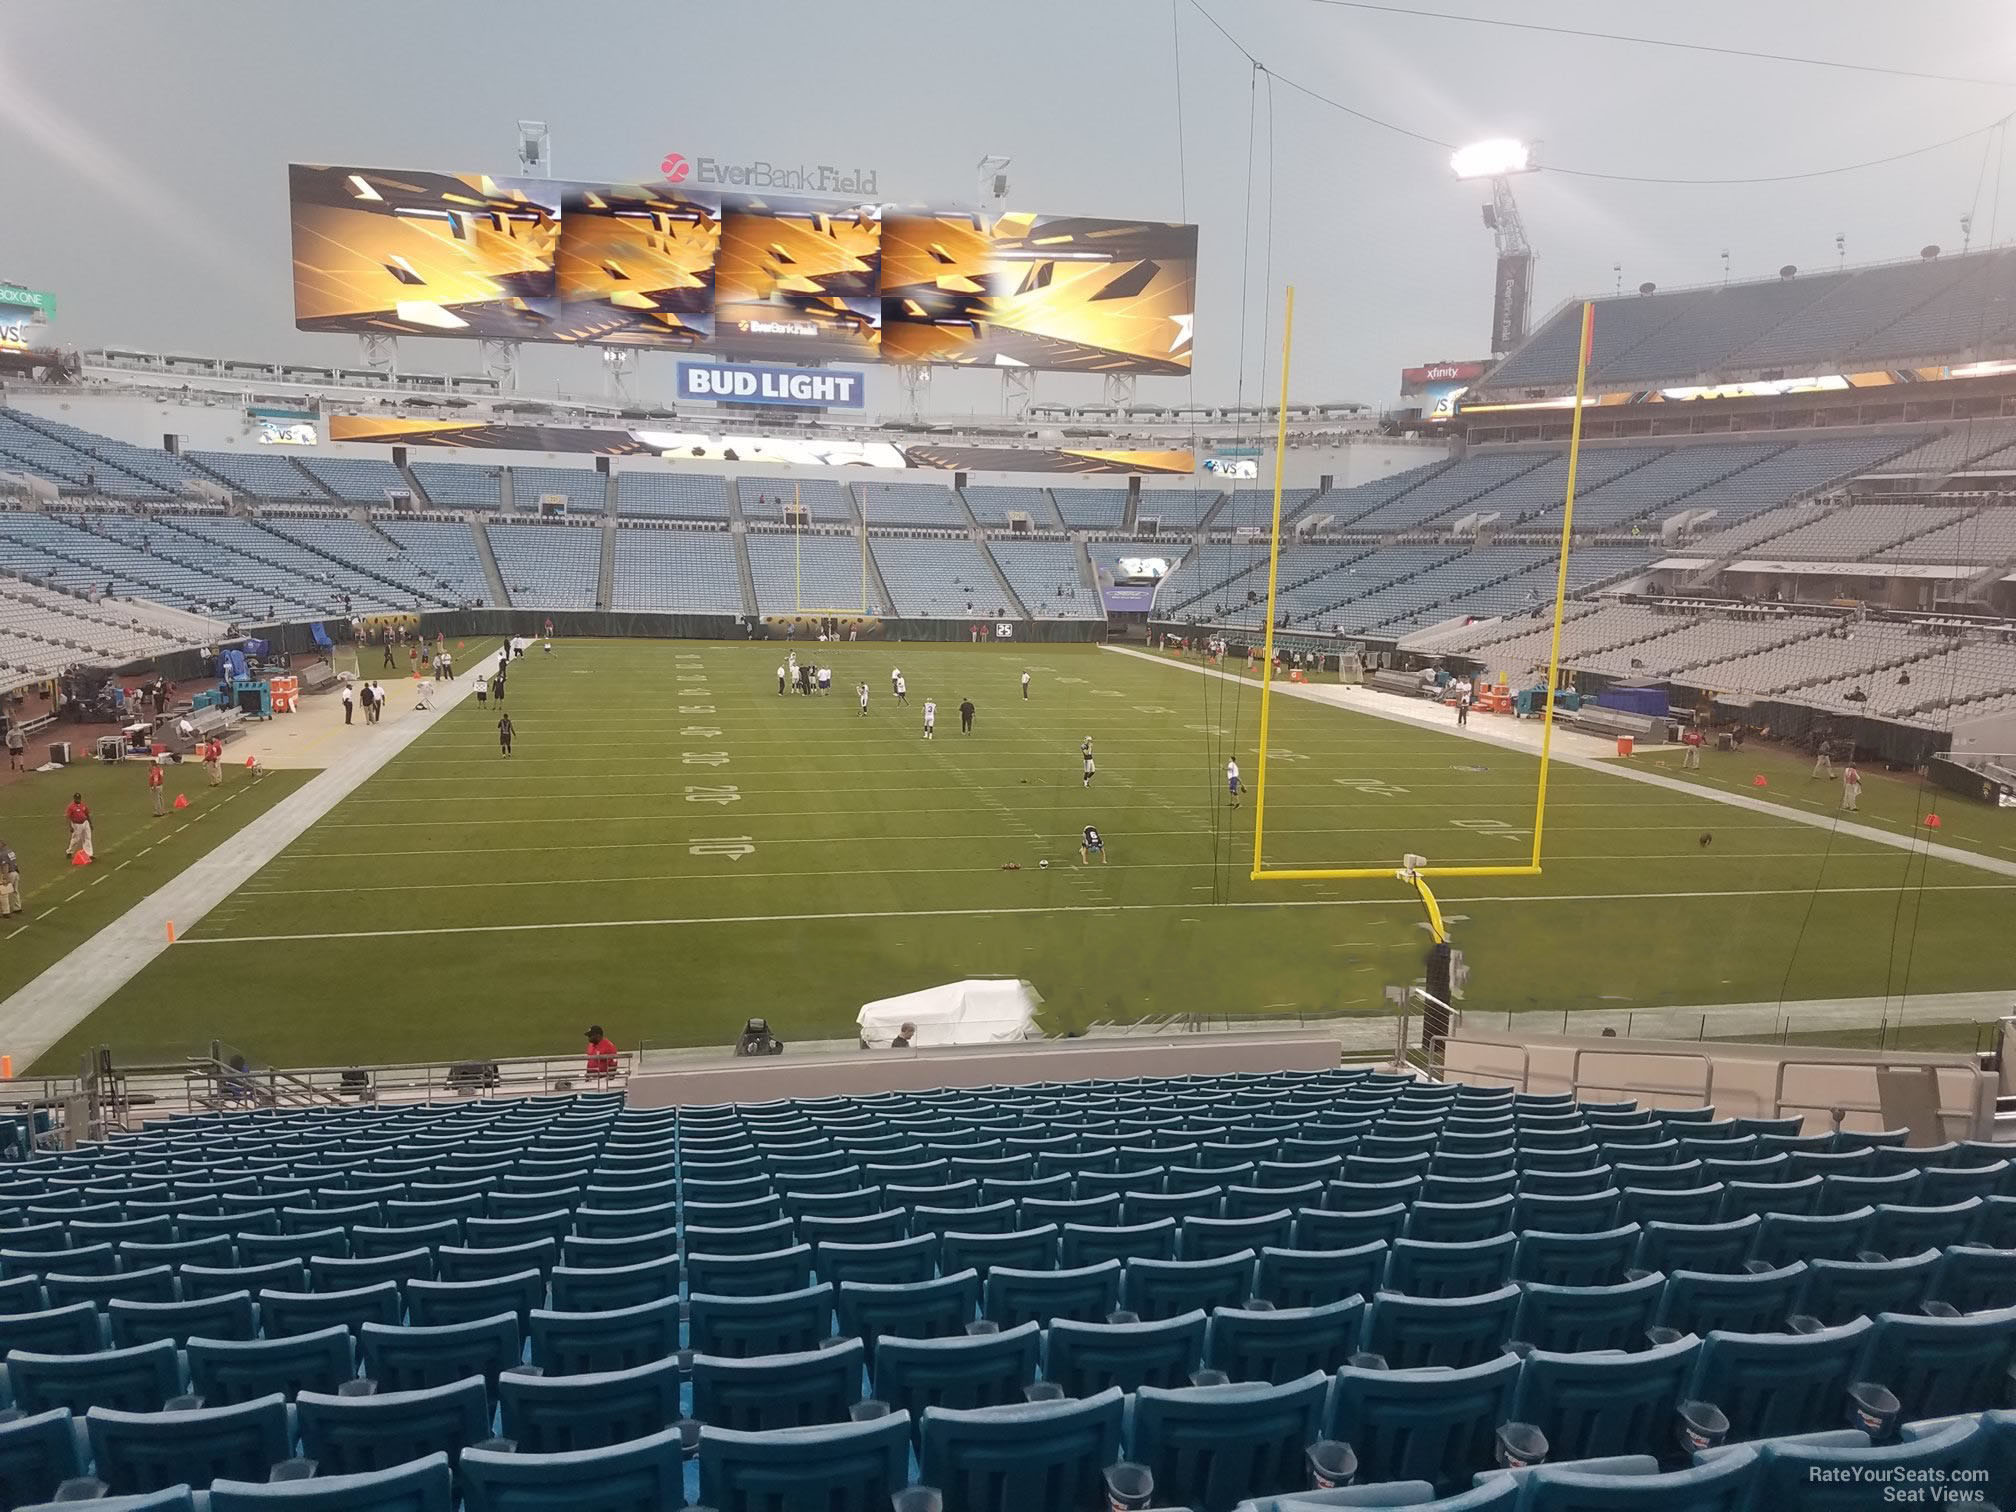 Section 149 at TIAA Bank Field